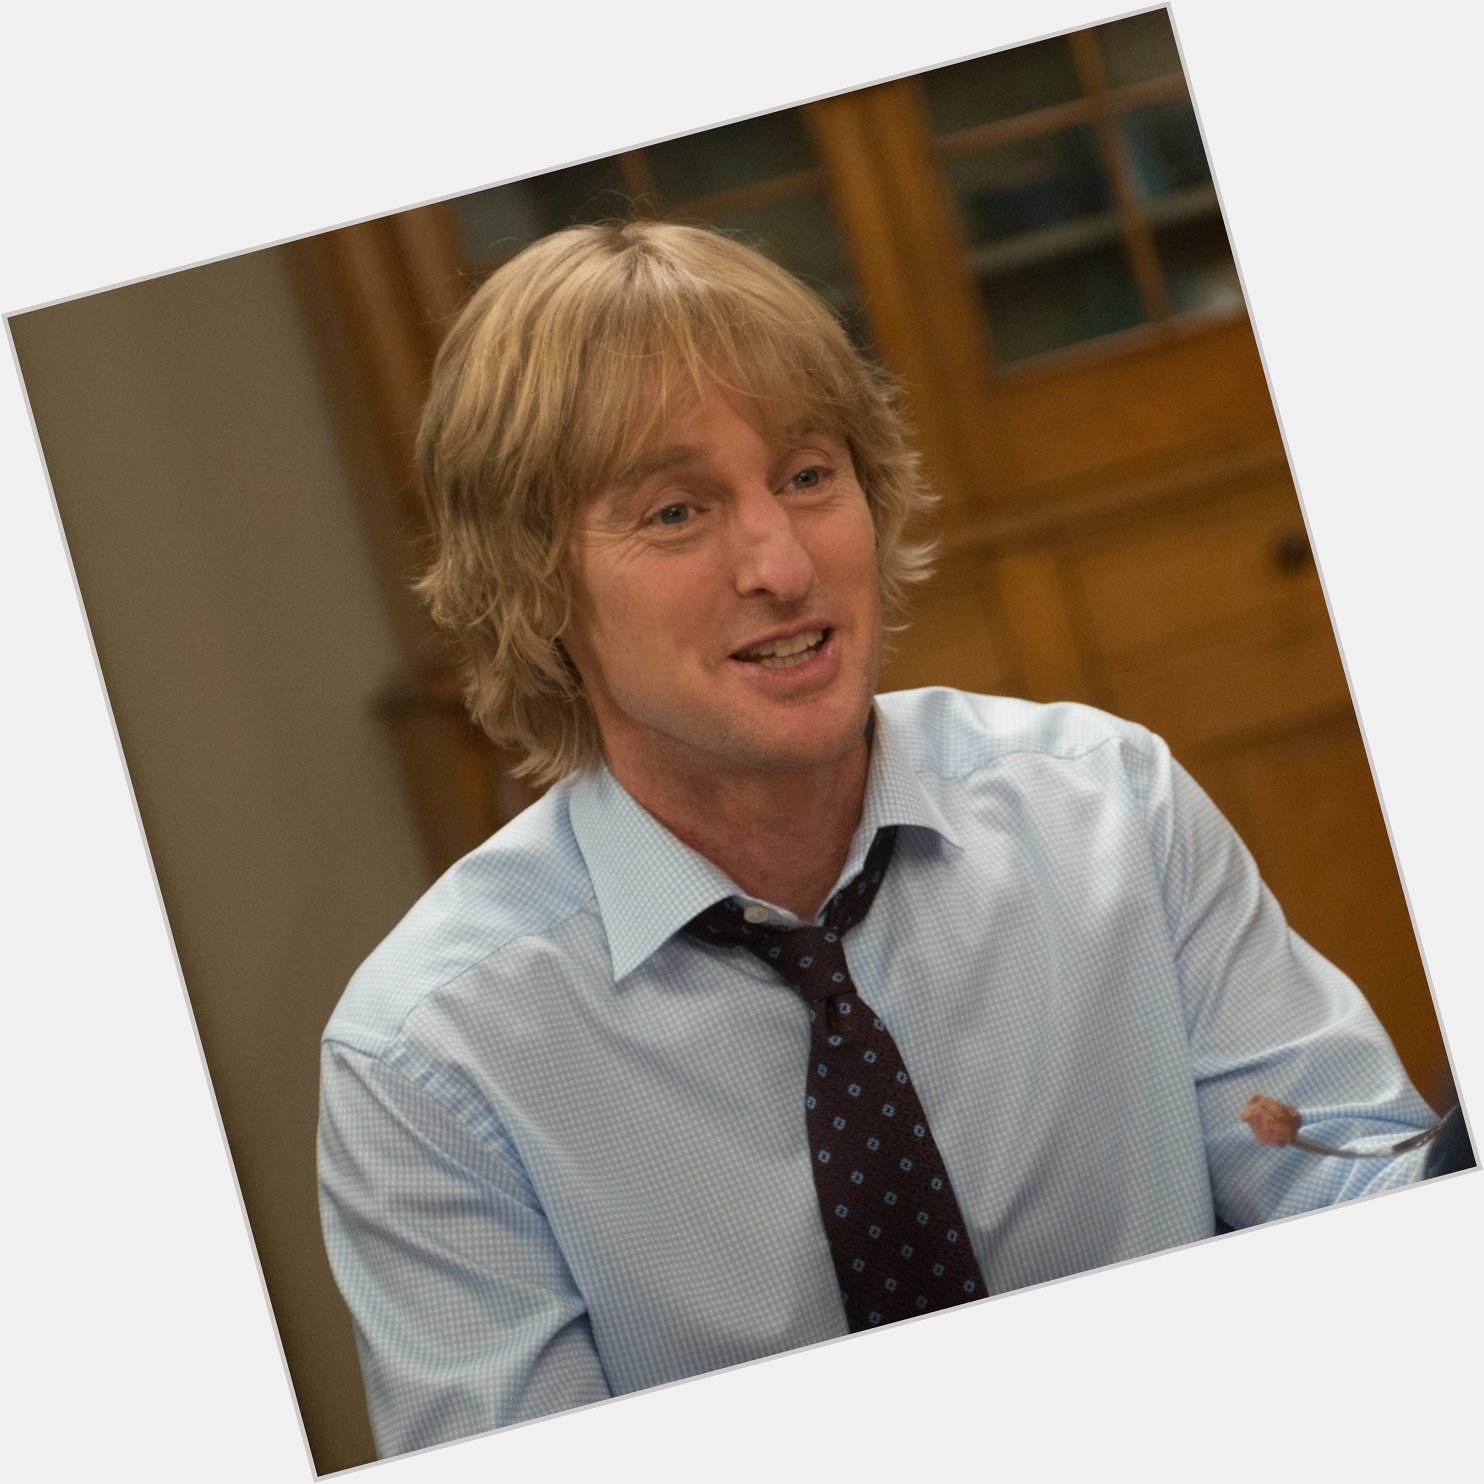 The family would like to wish Owen Wilson a very happy birthday! 